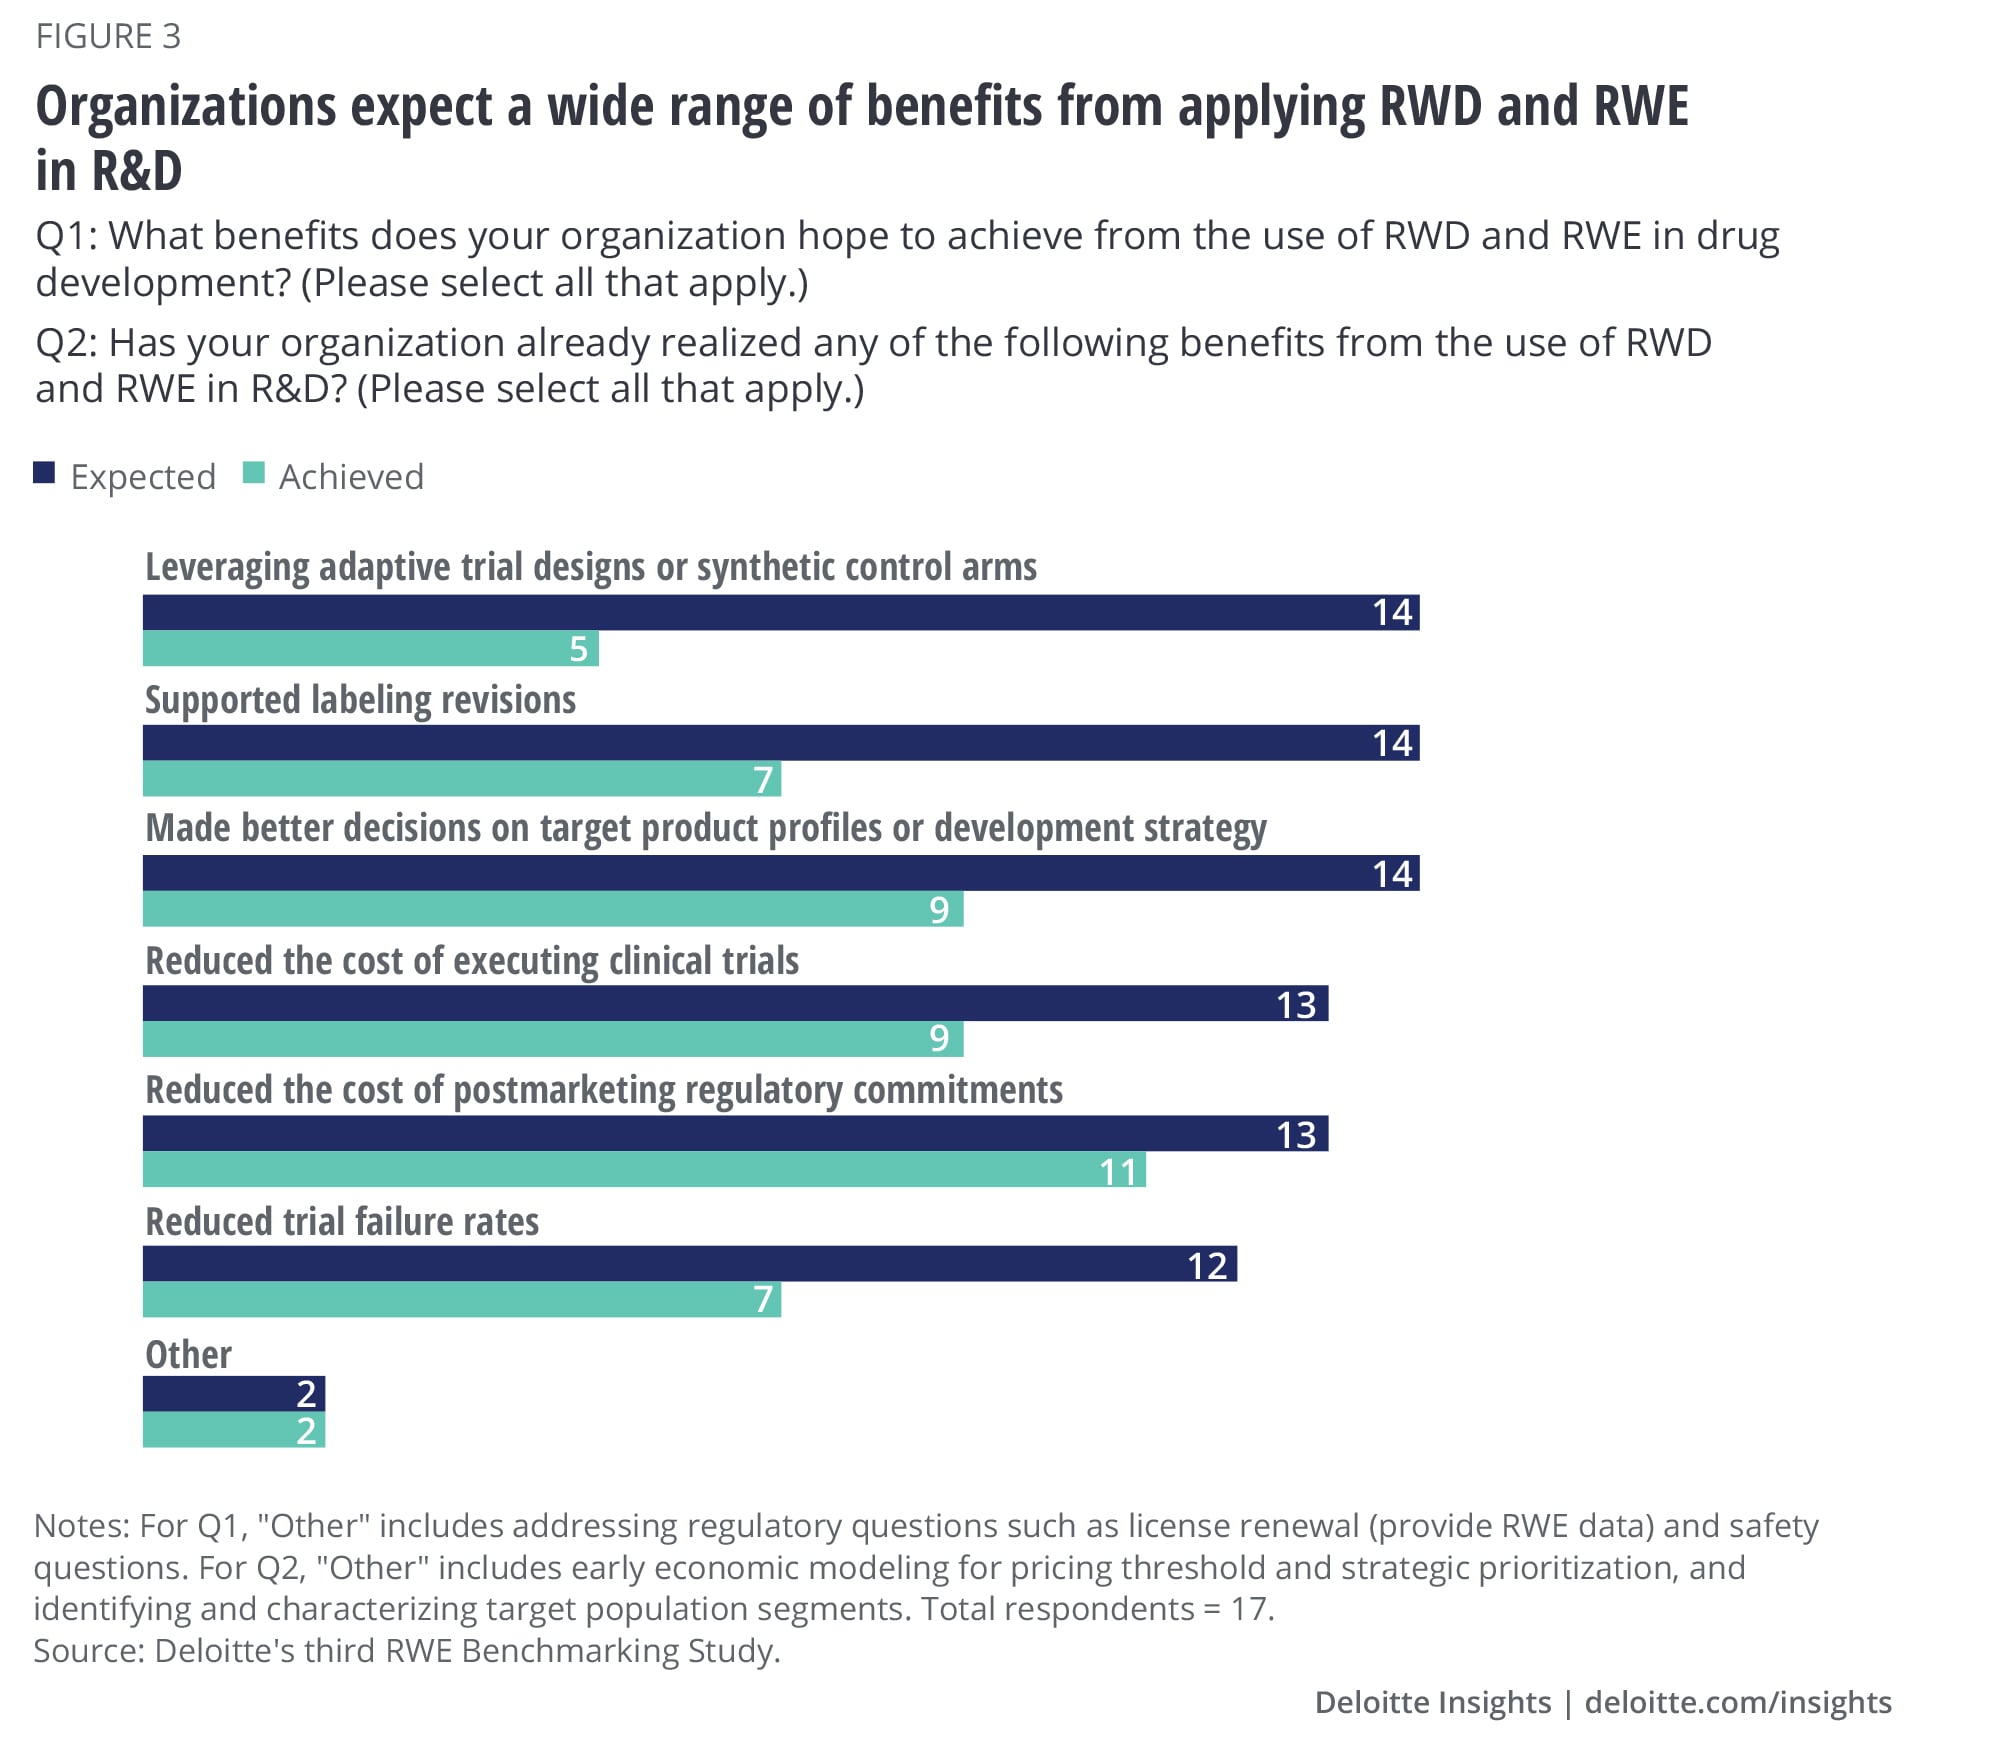 Organizations expect a wide range of benefits from applying RWD/E in R&D